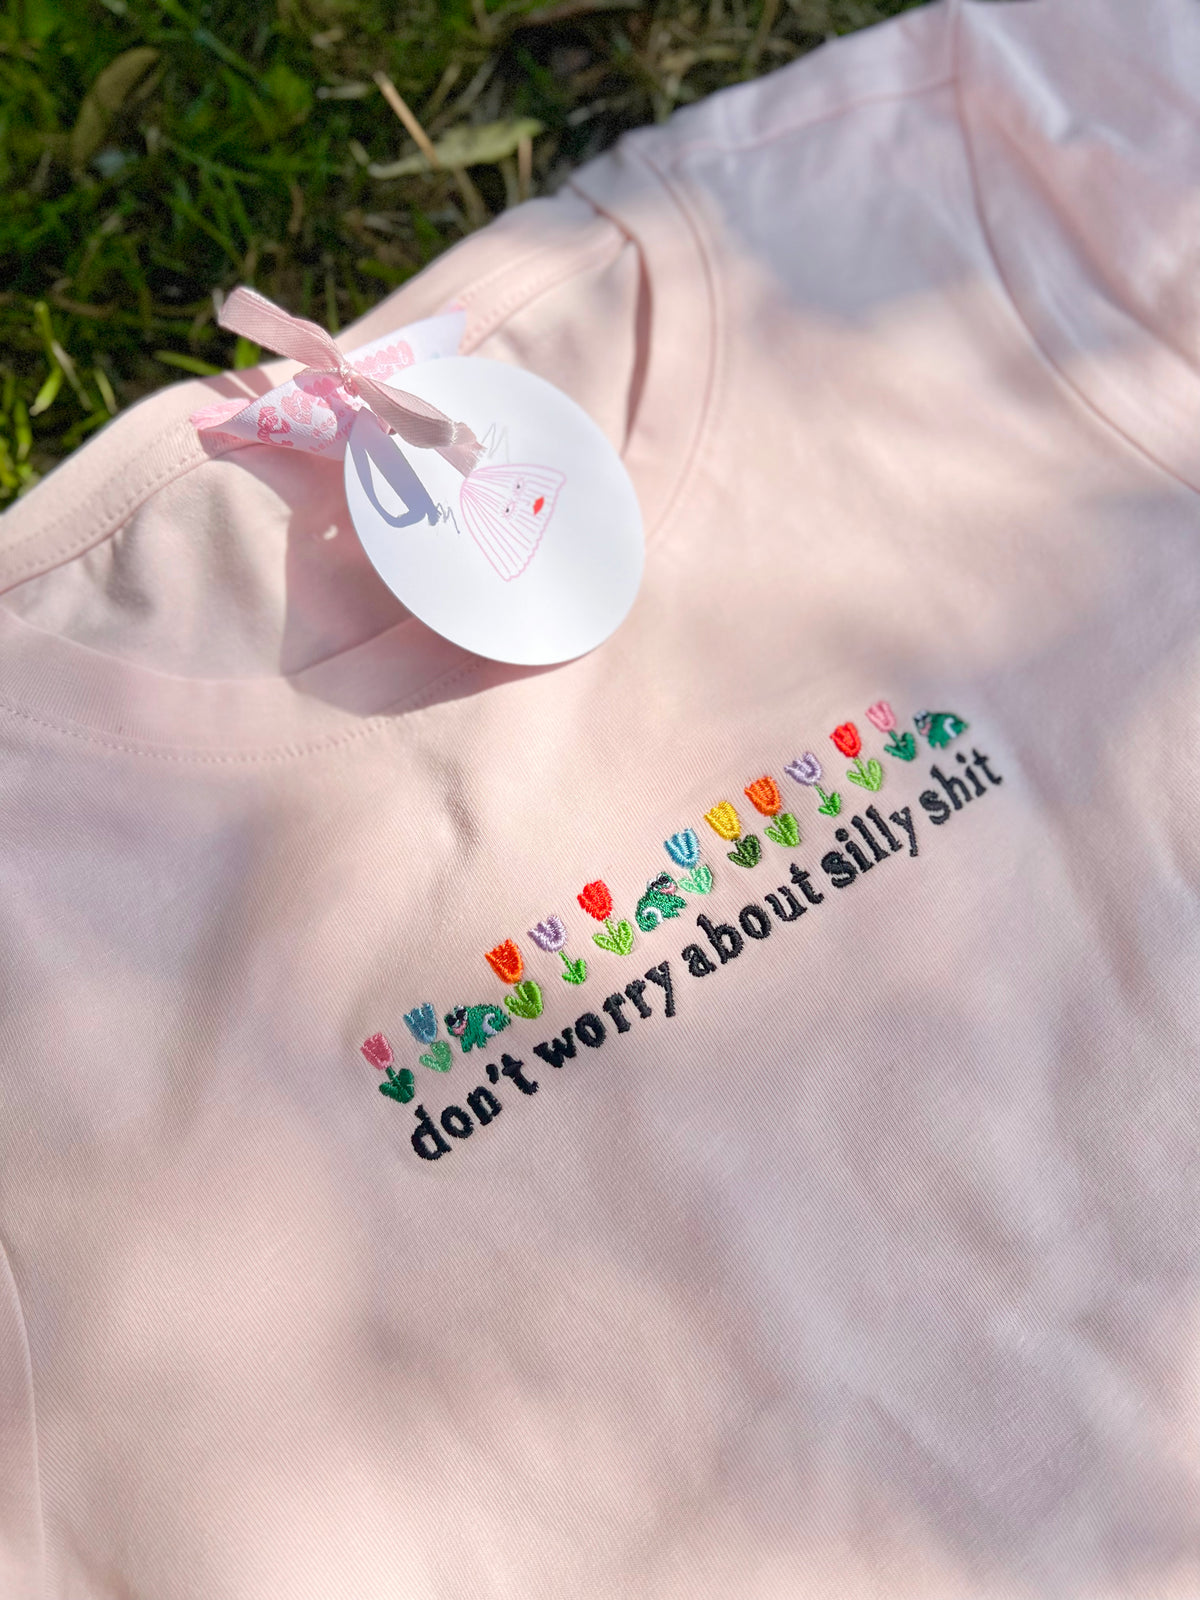 Don&#39;t Worry About Silly Shit Embroidered Crop Top